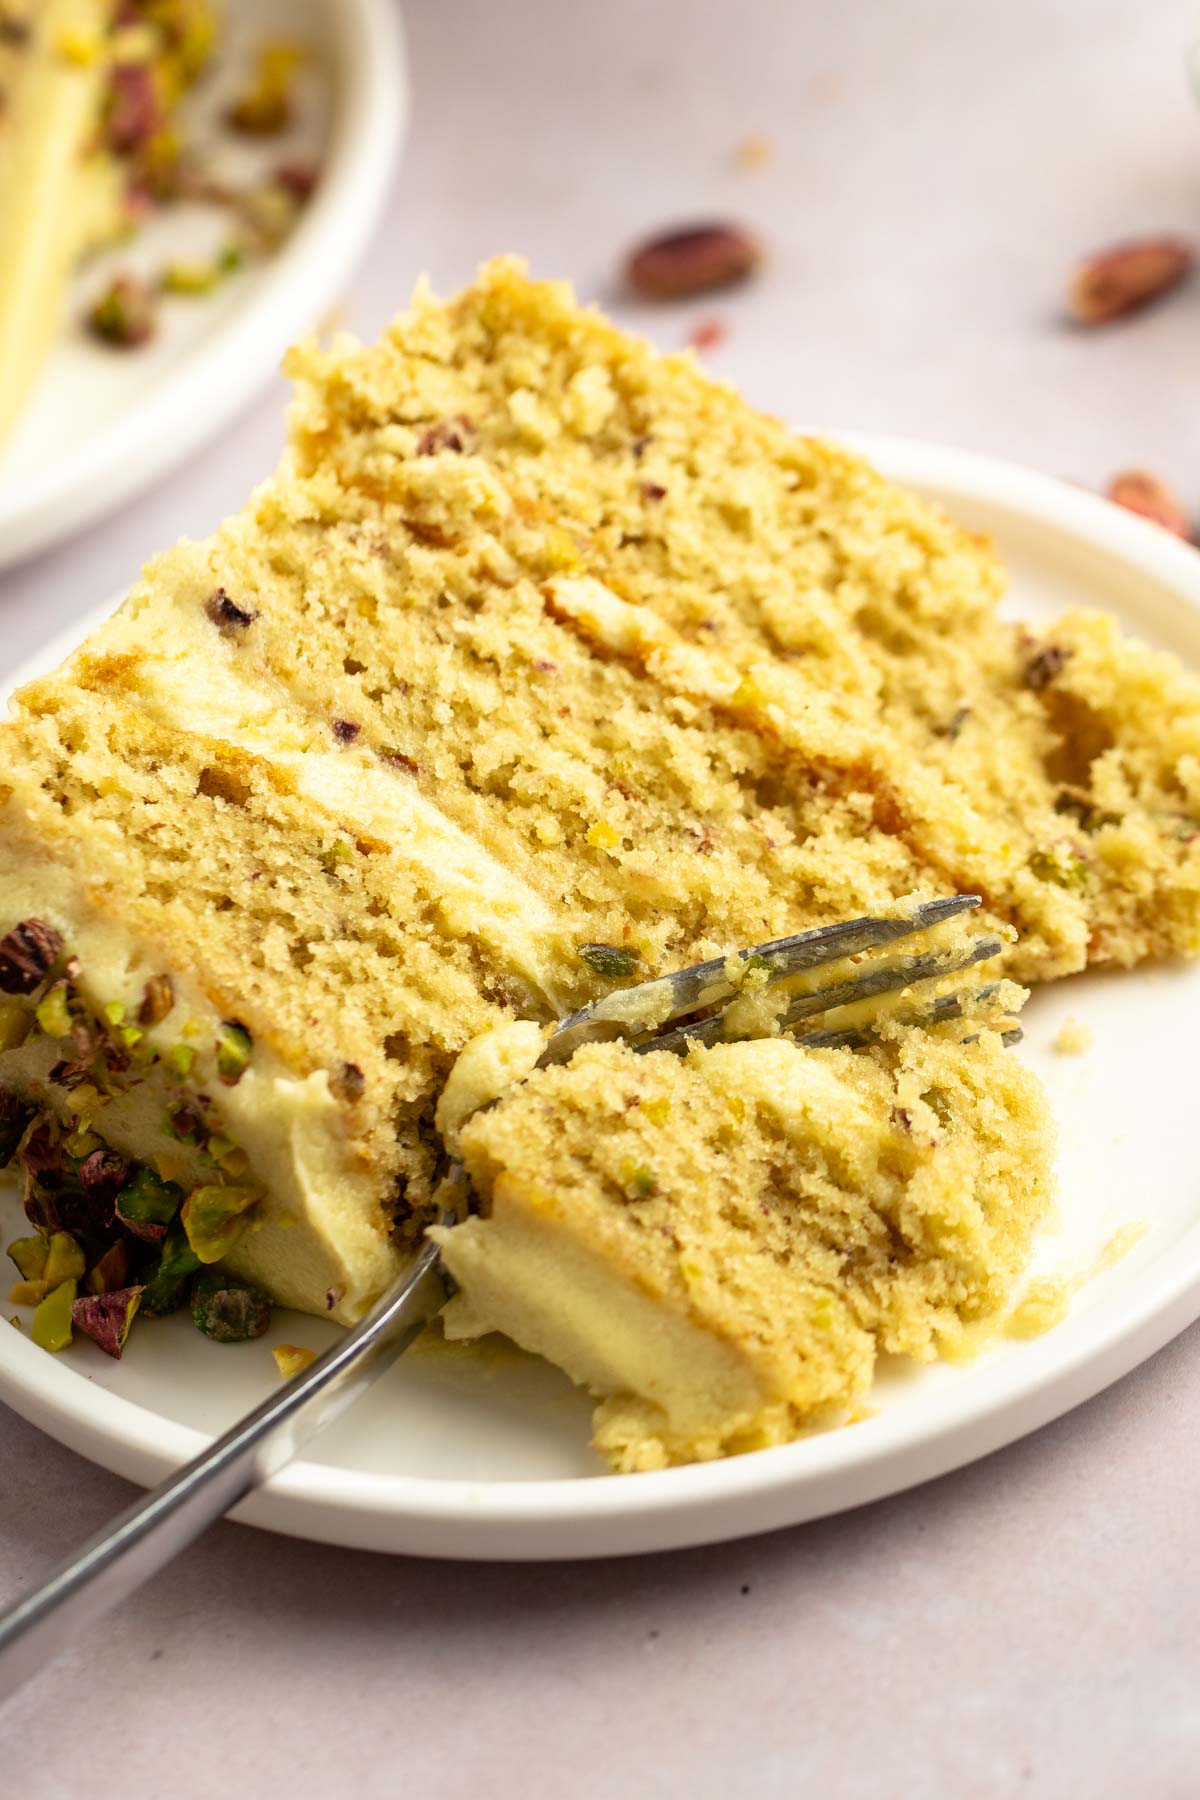 Slice of pistachio cake with a fork inserted into the slice.